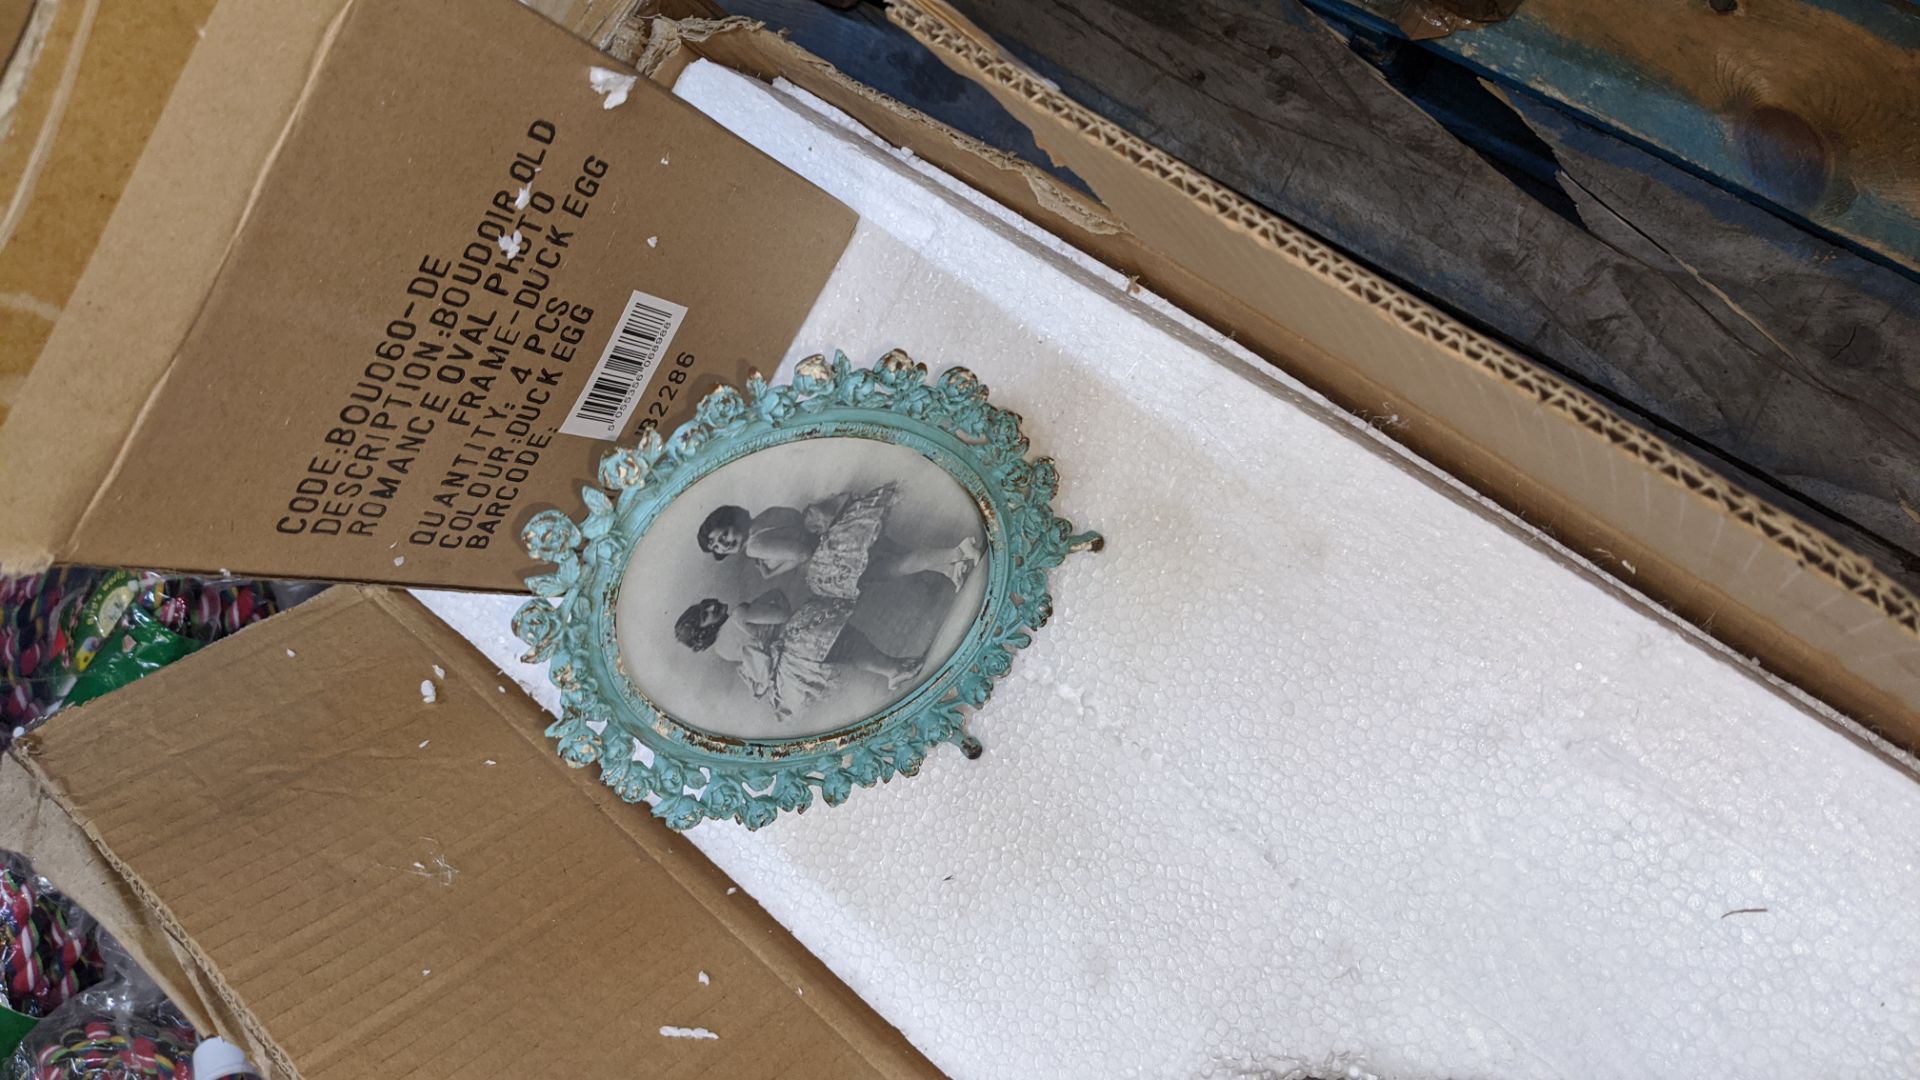 64 off Boudoir Old Romance oval photo frames in duck egg finish (2 cartons) - Image 3 of 4